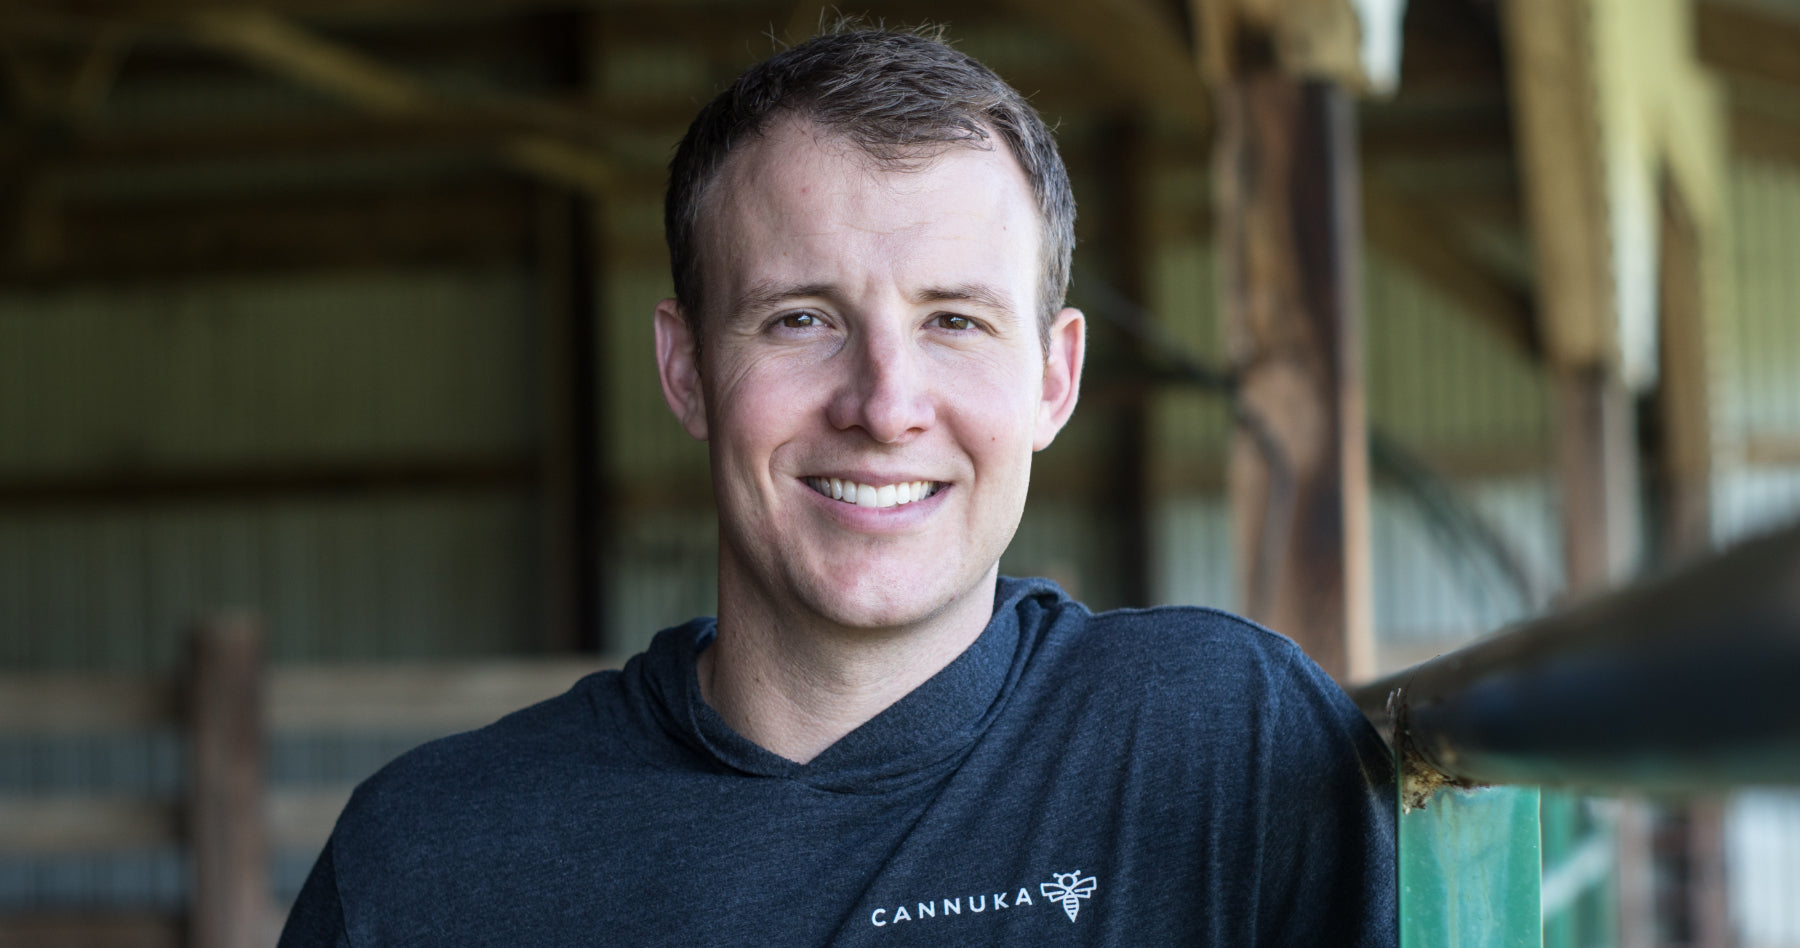 Portrait of Cannuka CEO Michael Bumgarner, standing inside his barn smiling at camera wearing a black Cannuka sweater. This is a tight portrait of his face and the background is out of focus. 